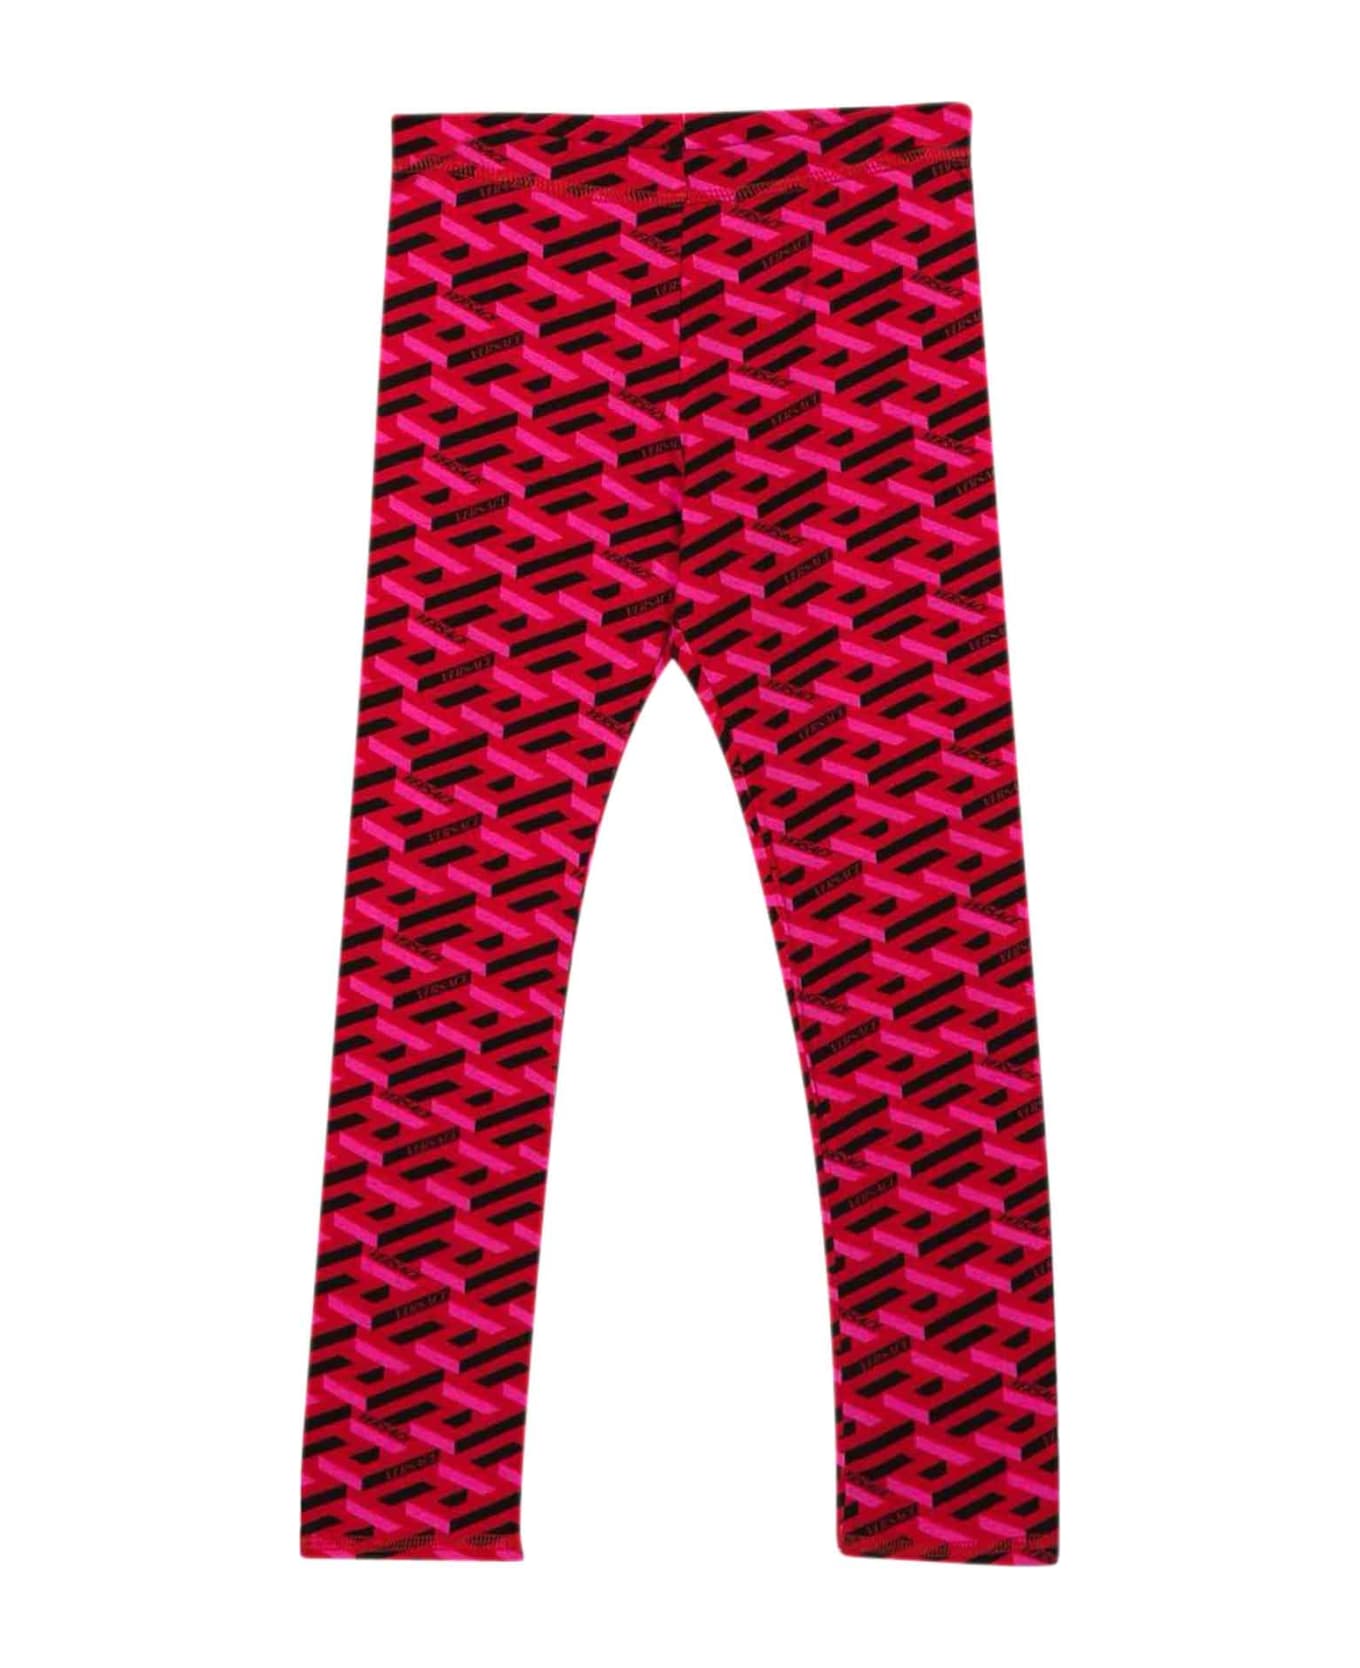 Versace Red Leggings Girl Kids - Rosso/fucsia